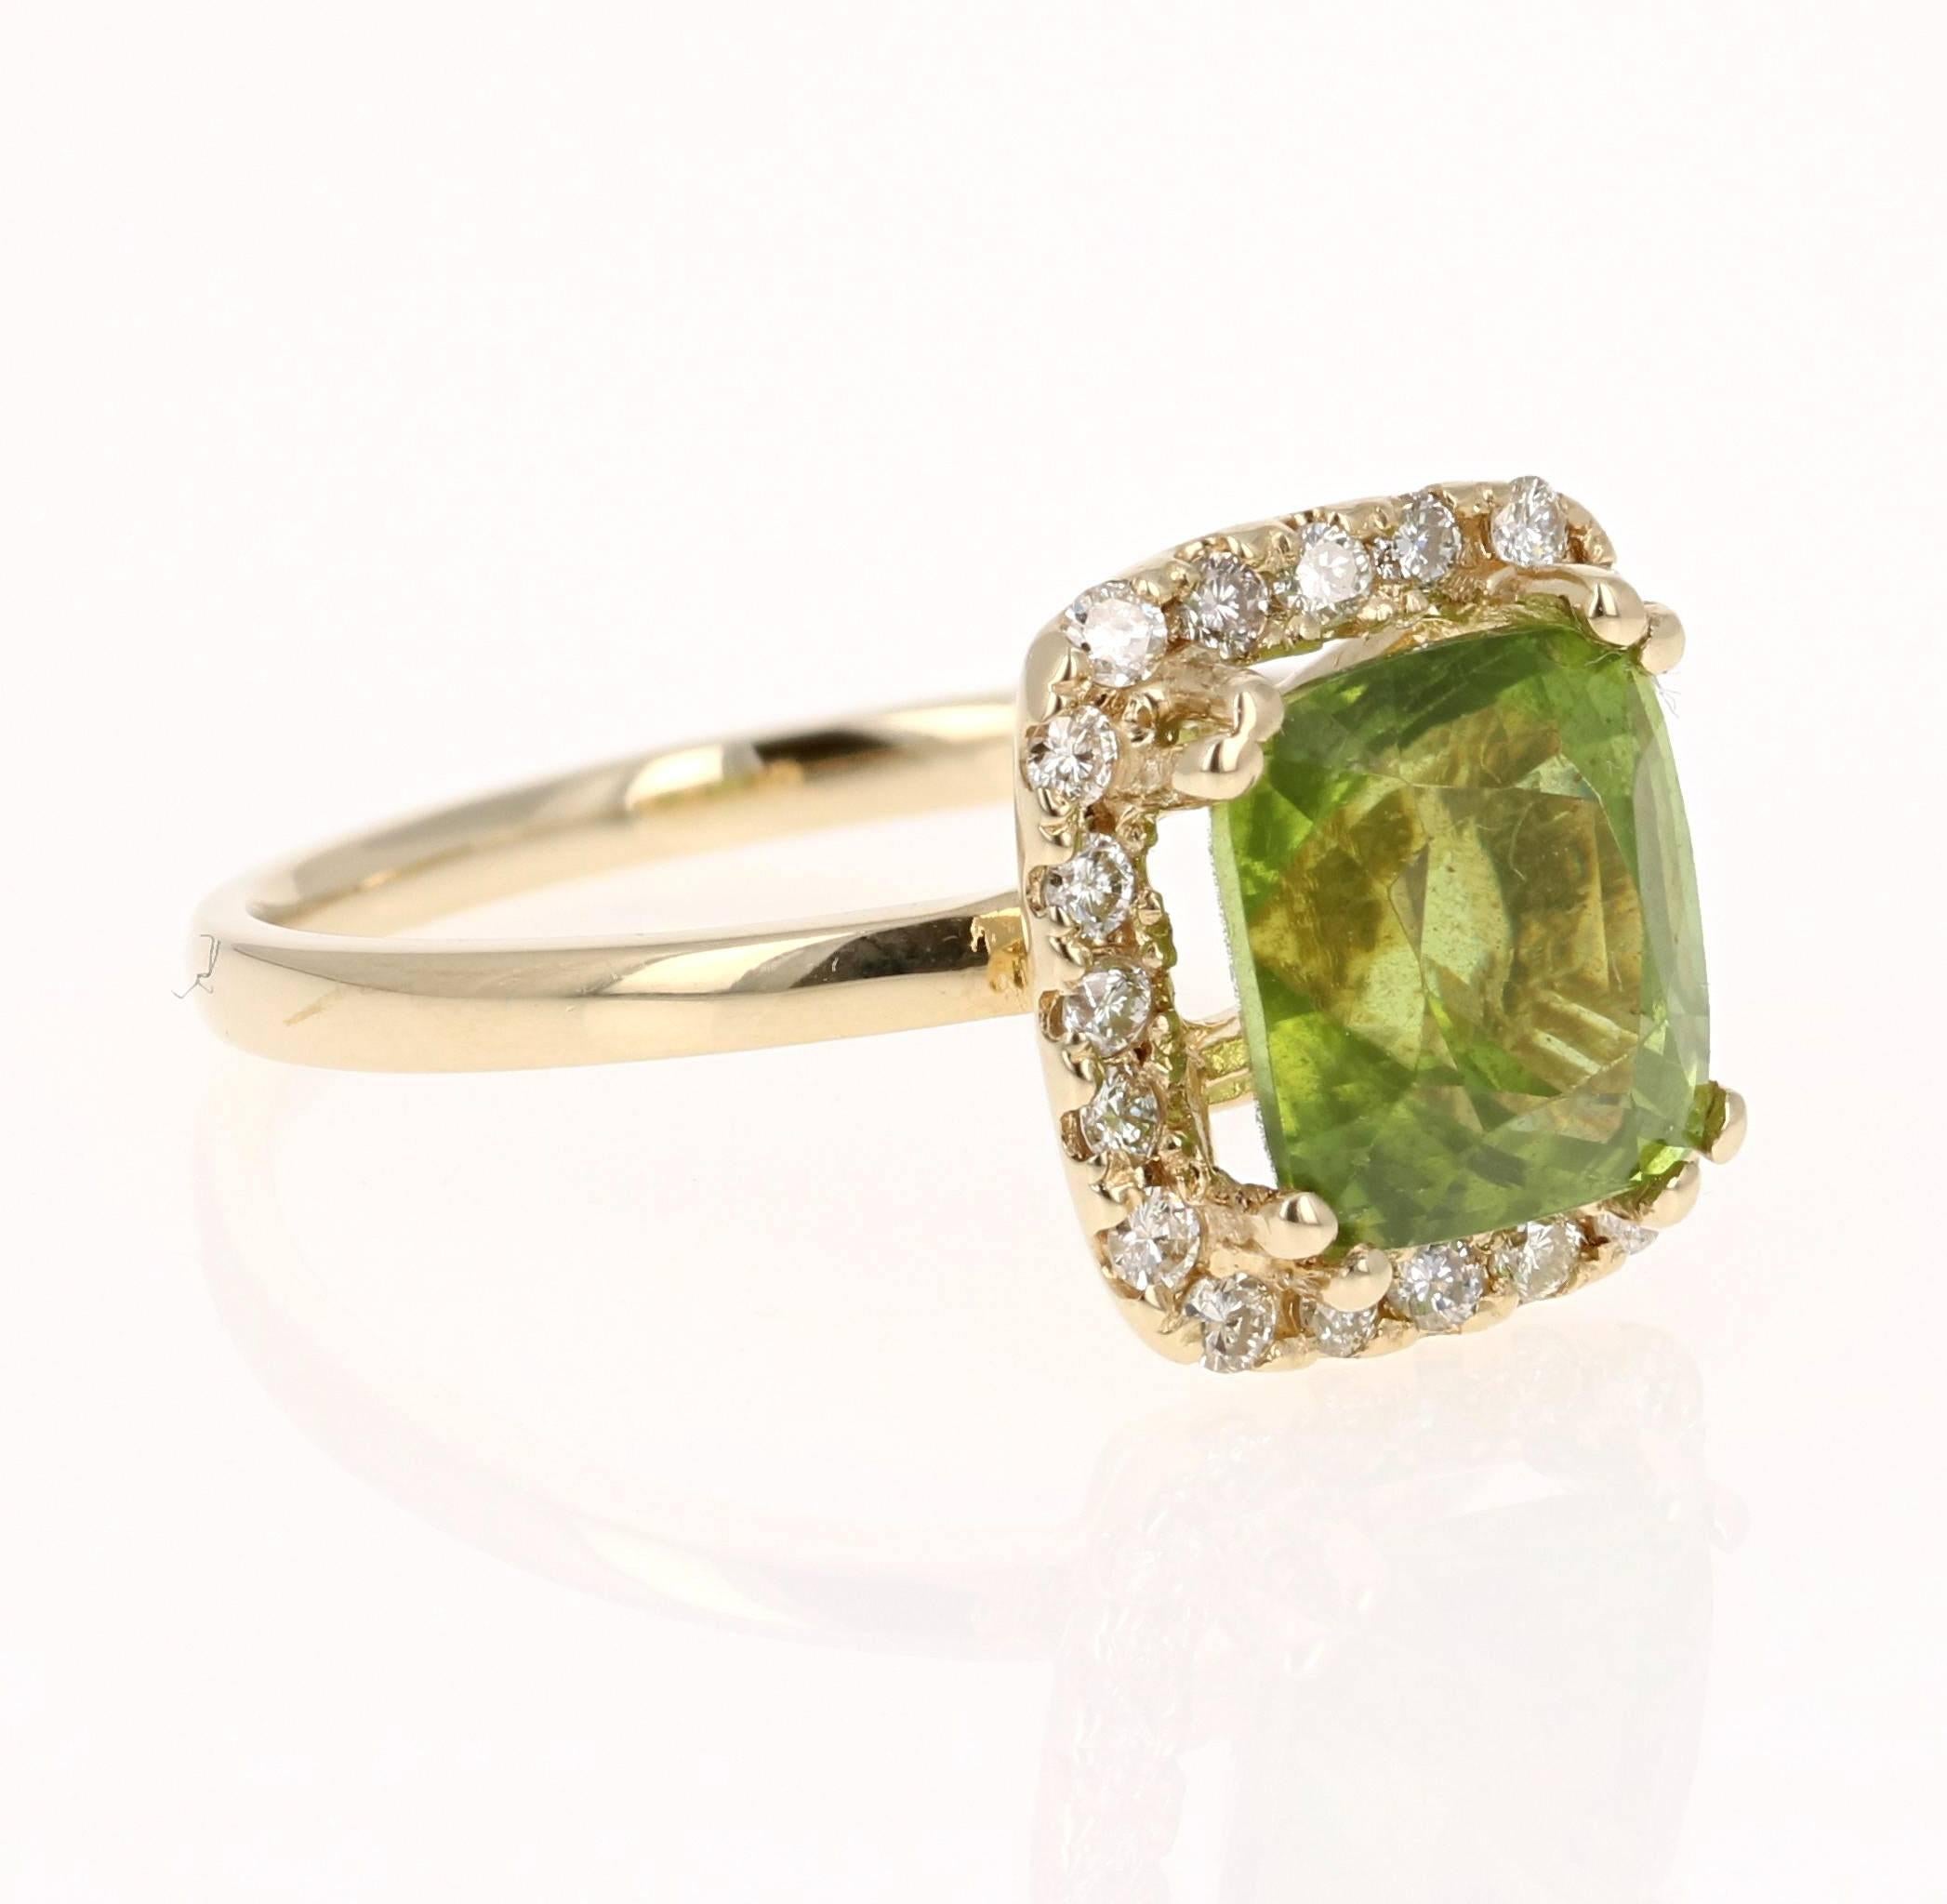 This beautiful ring has a Emerald Cut Peridot in the center that weighs 3.42 carats. The ring is surrounded by a gorgeous halo of 21 Round Cut Diamonds that weigh 0.31 carats. The total carat weight of the ring is 3.73 carats. The setting is crafted